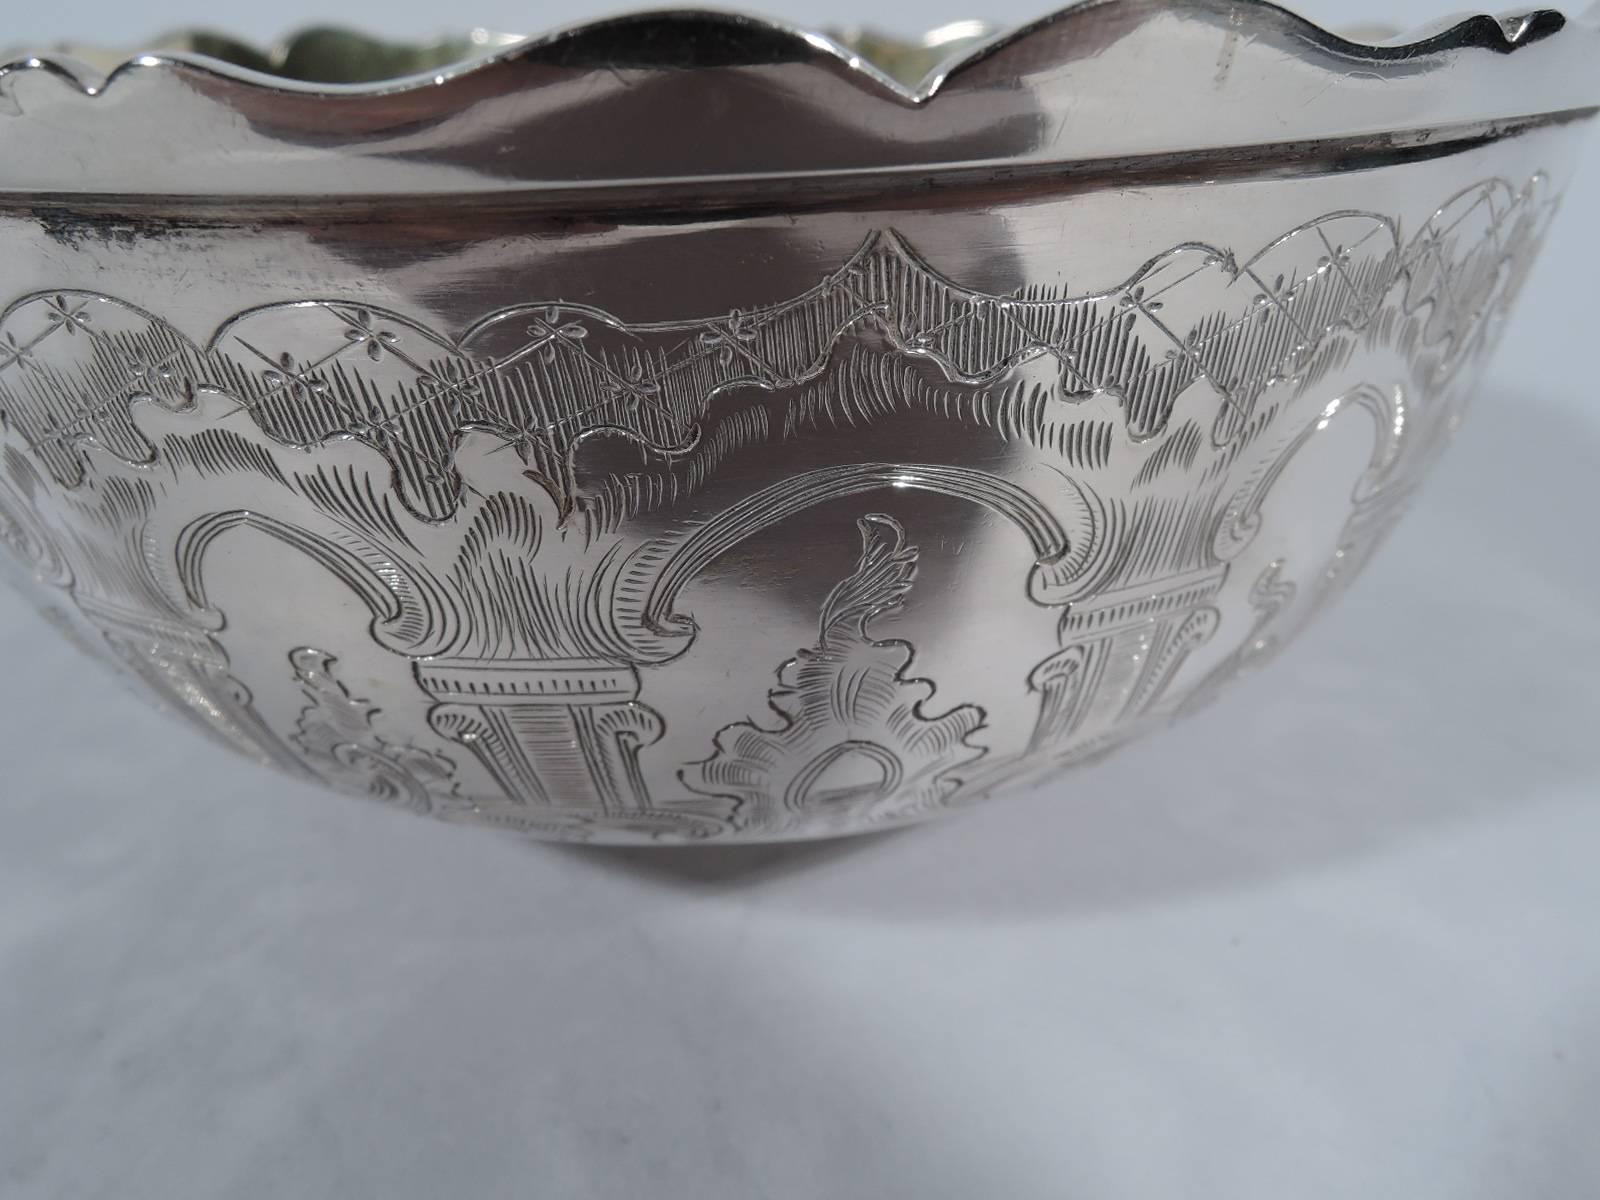 Antique Chinese Export Silver Bowl by Linchong of Canton 1